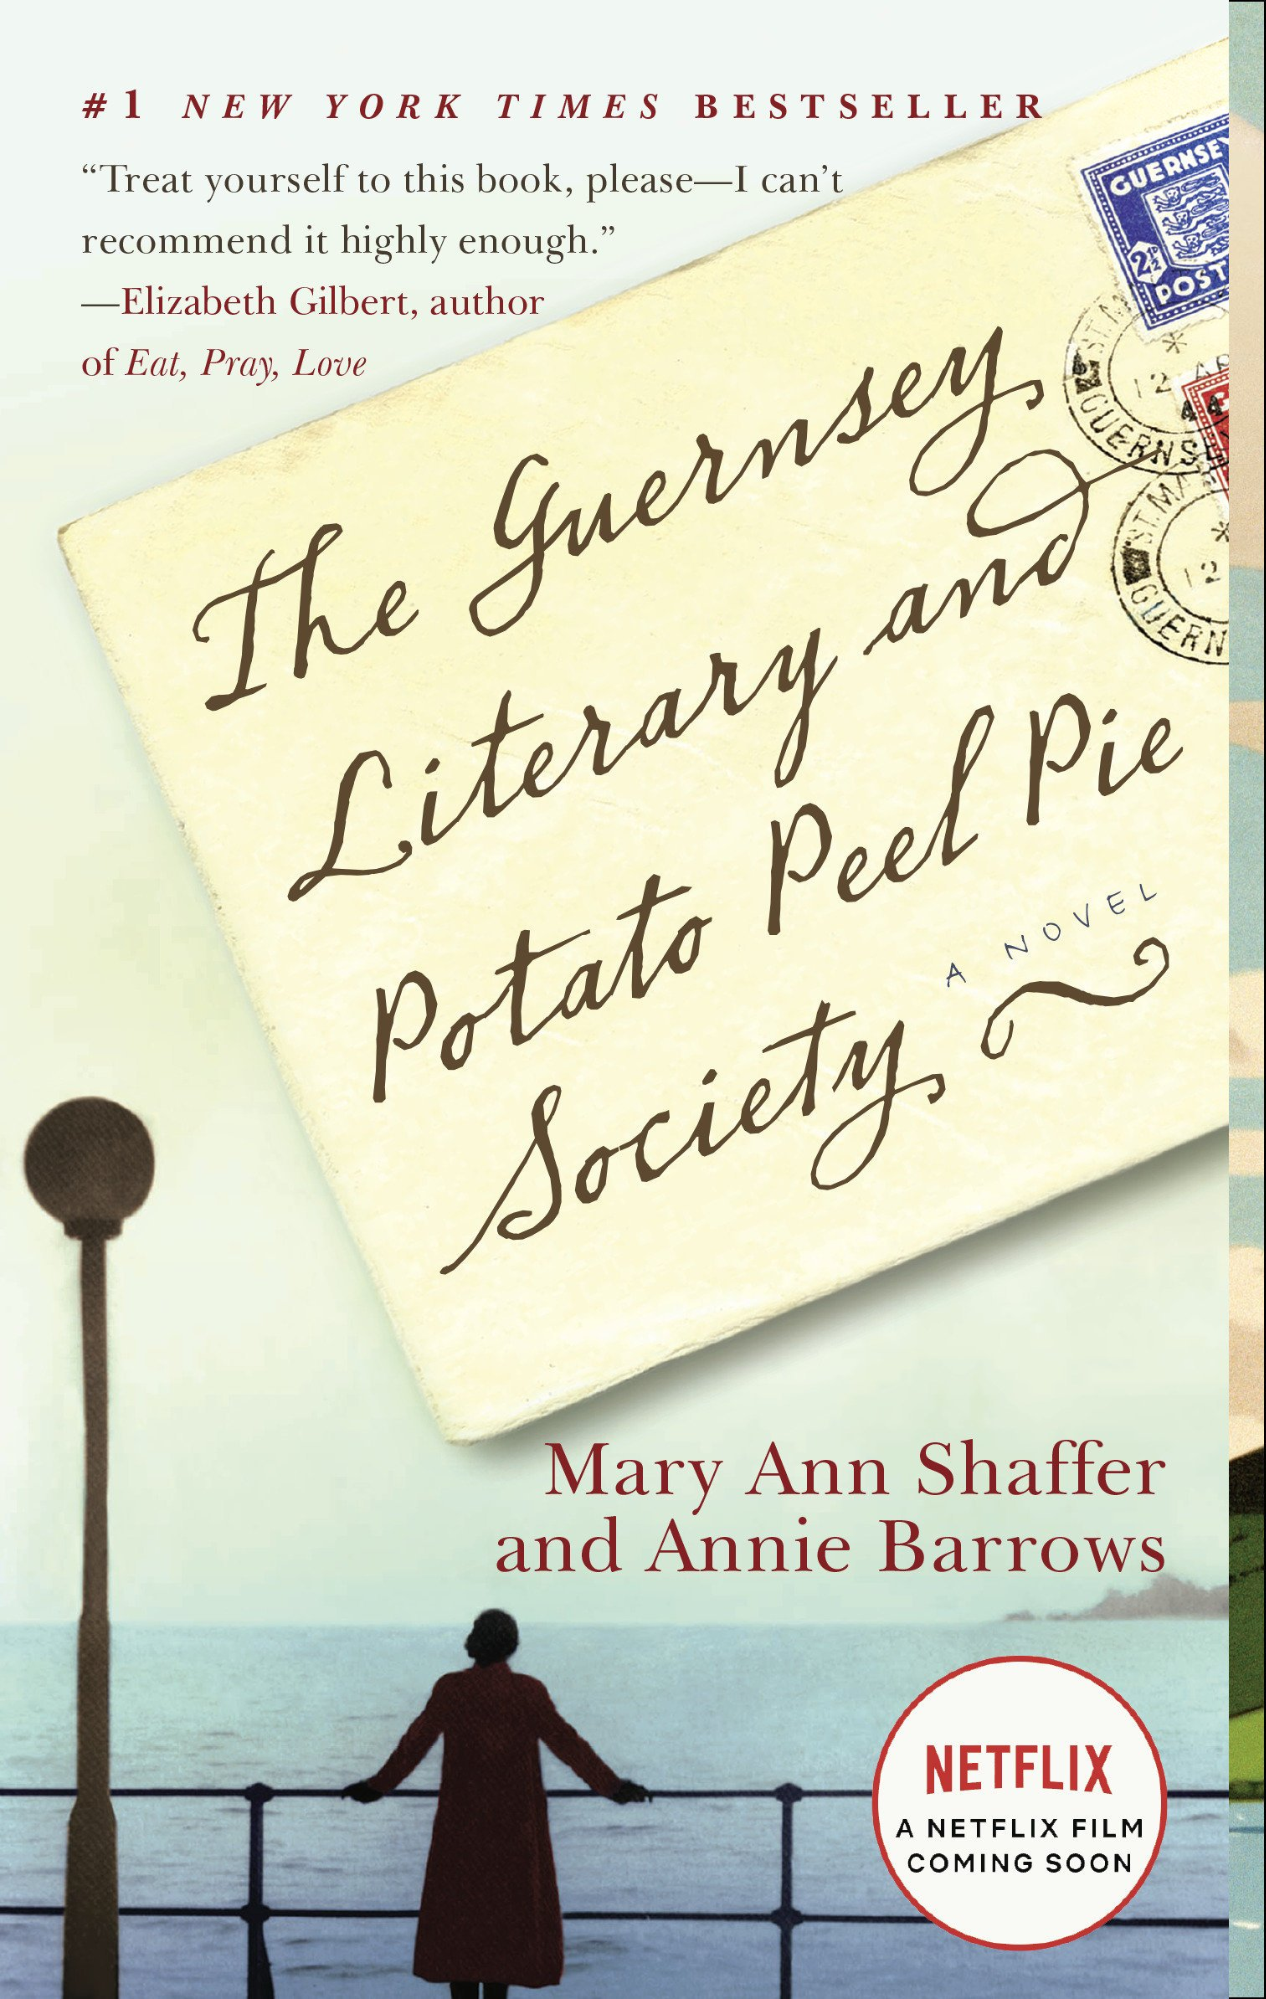 View description for 'The Guernsey Literary and Potato Peel Pie Society'